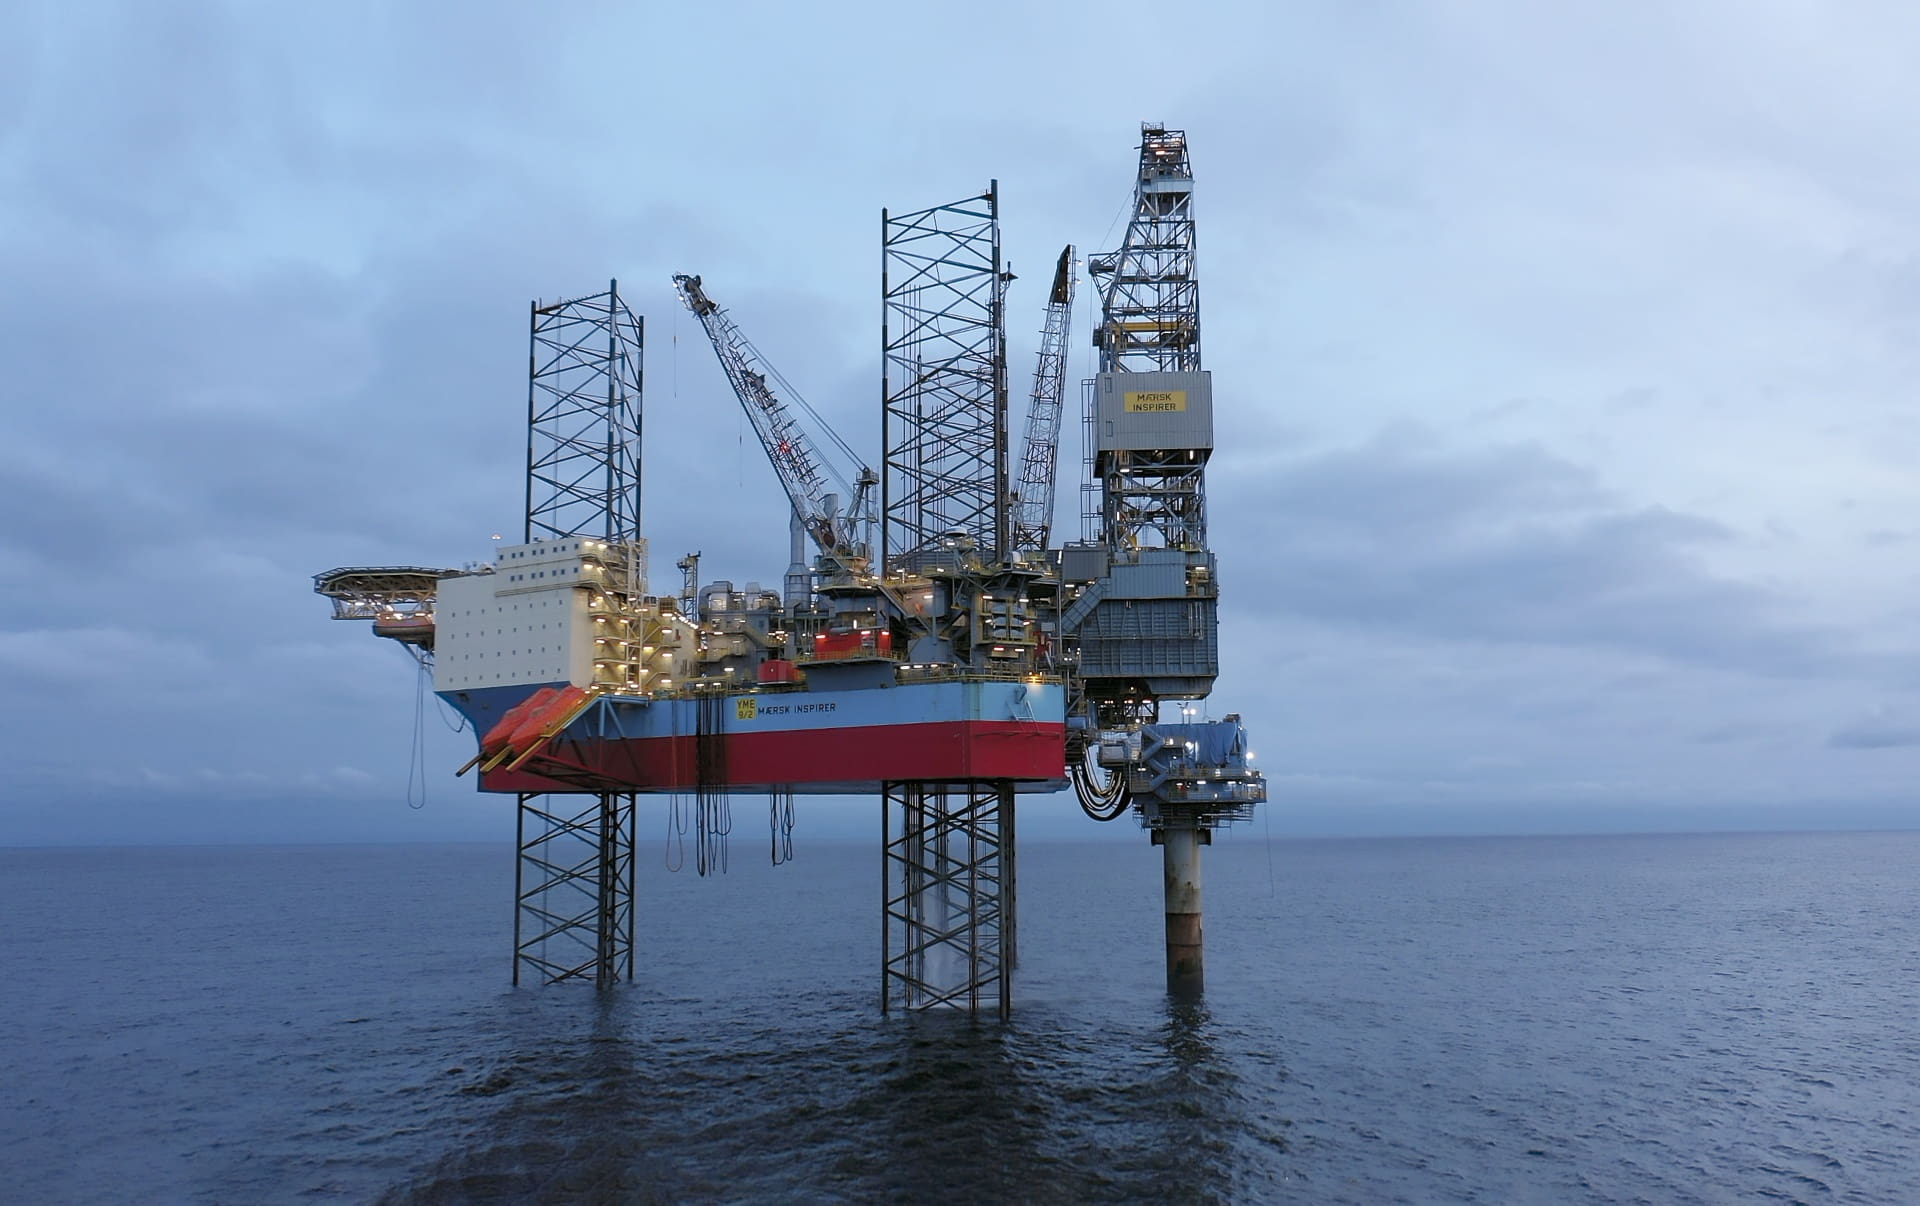 Norwegian player buying stake in Repsol’s North Sea field